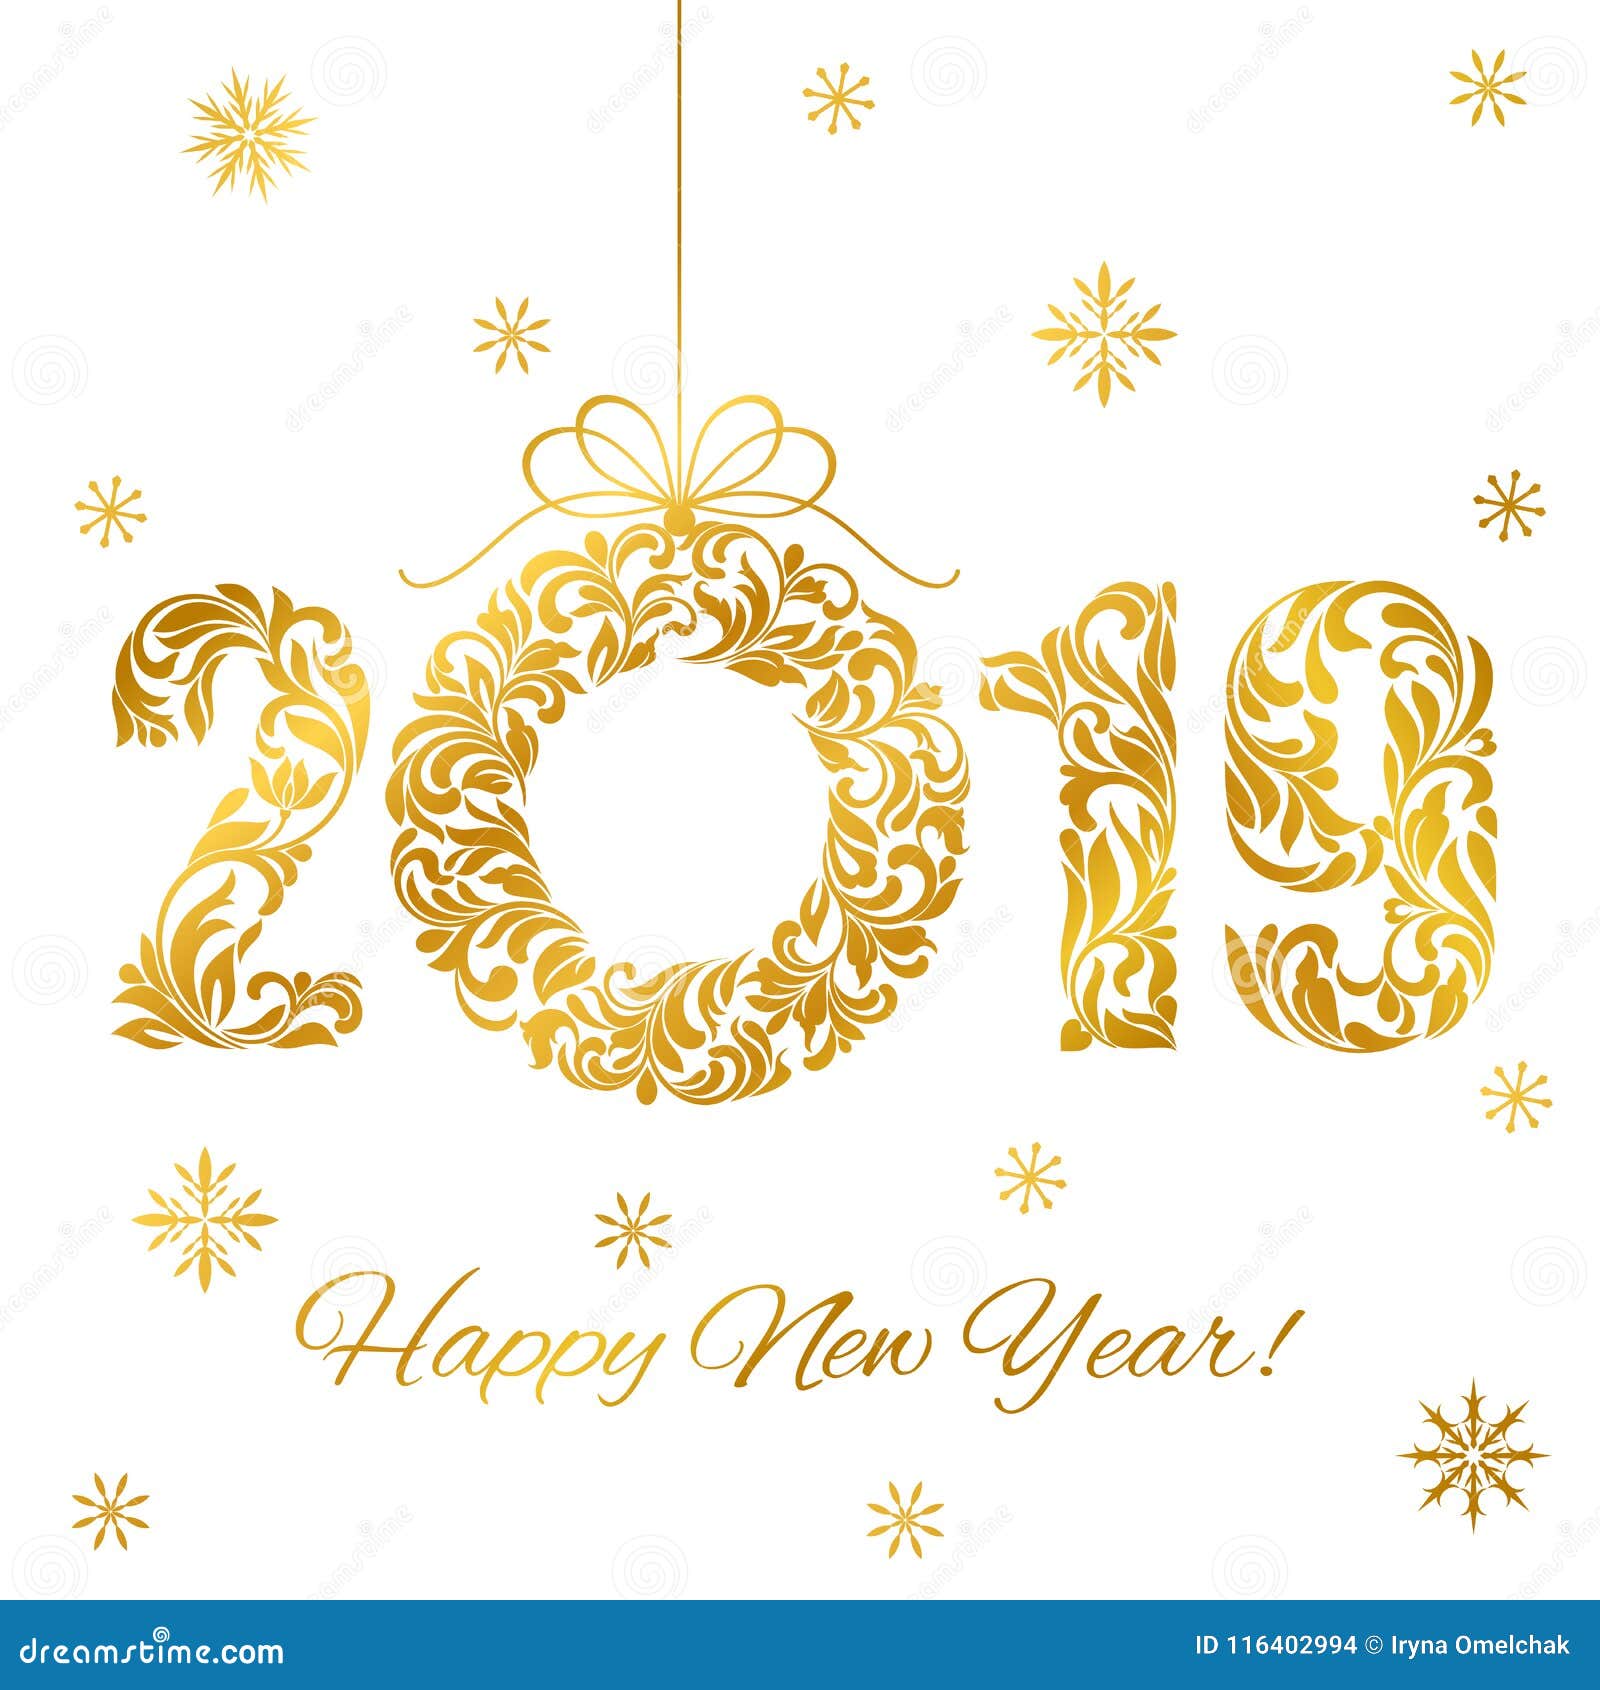 Happy New Year 2019. Decorative Font made of swirls and floral elements. Golden Numbers and Christmas wreath isolated on a white background.